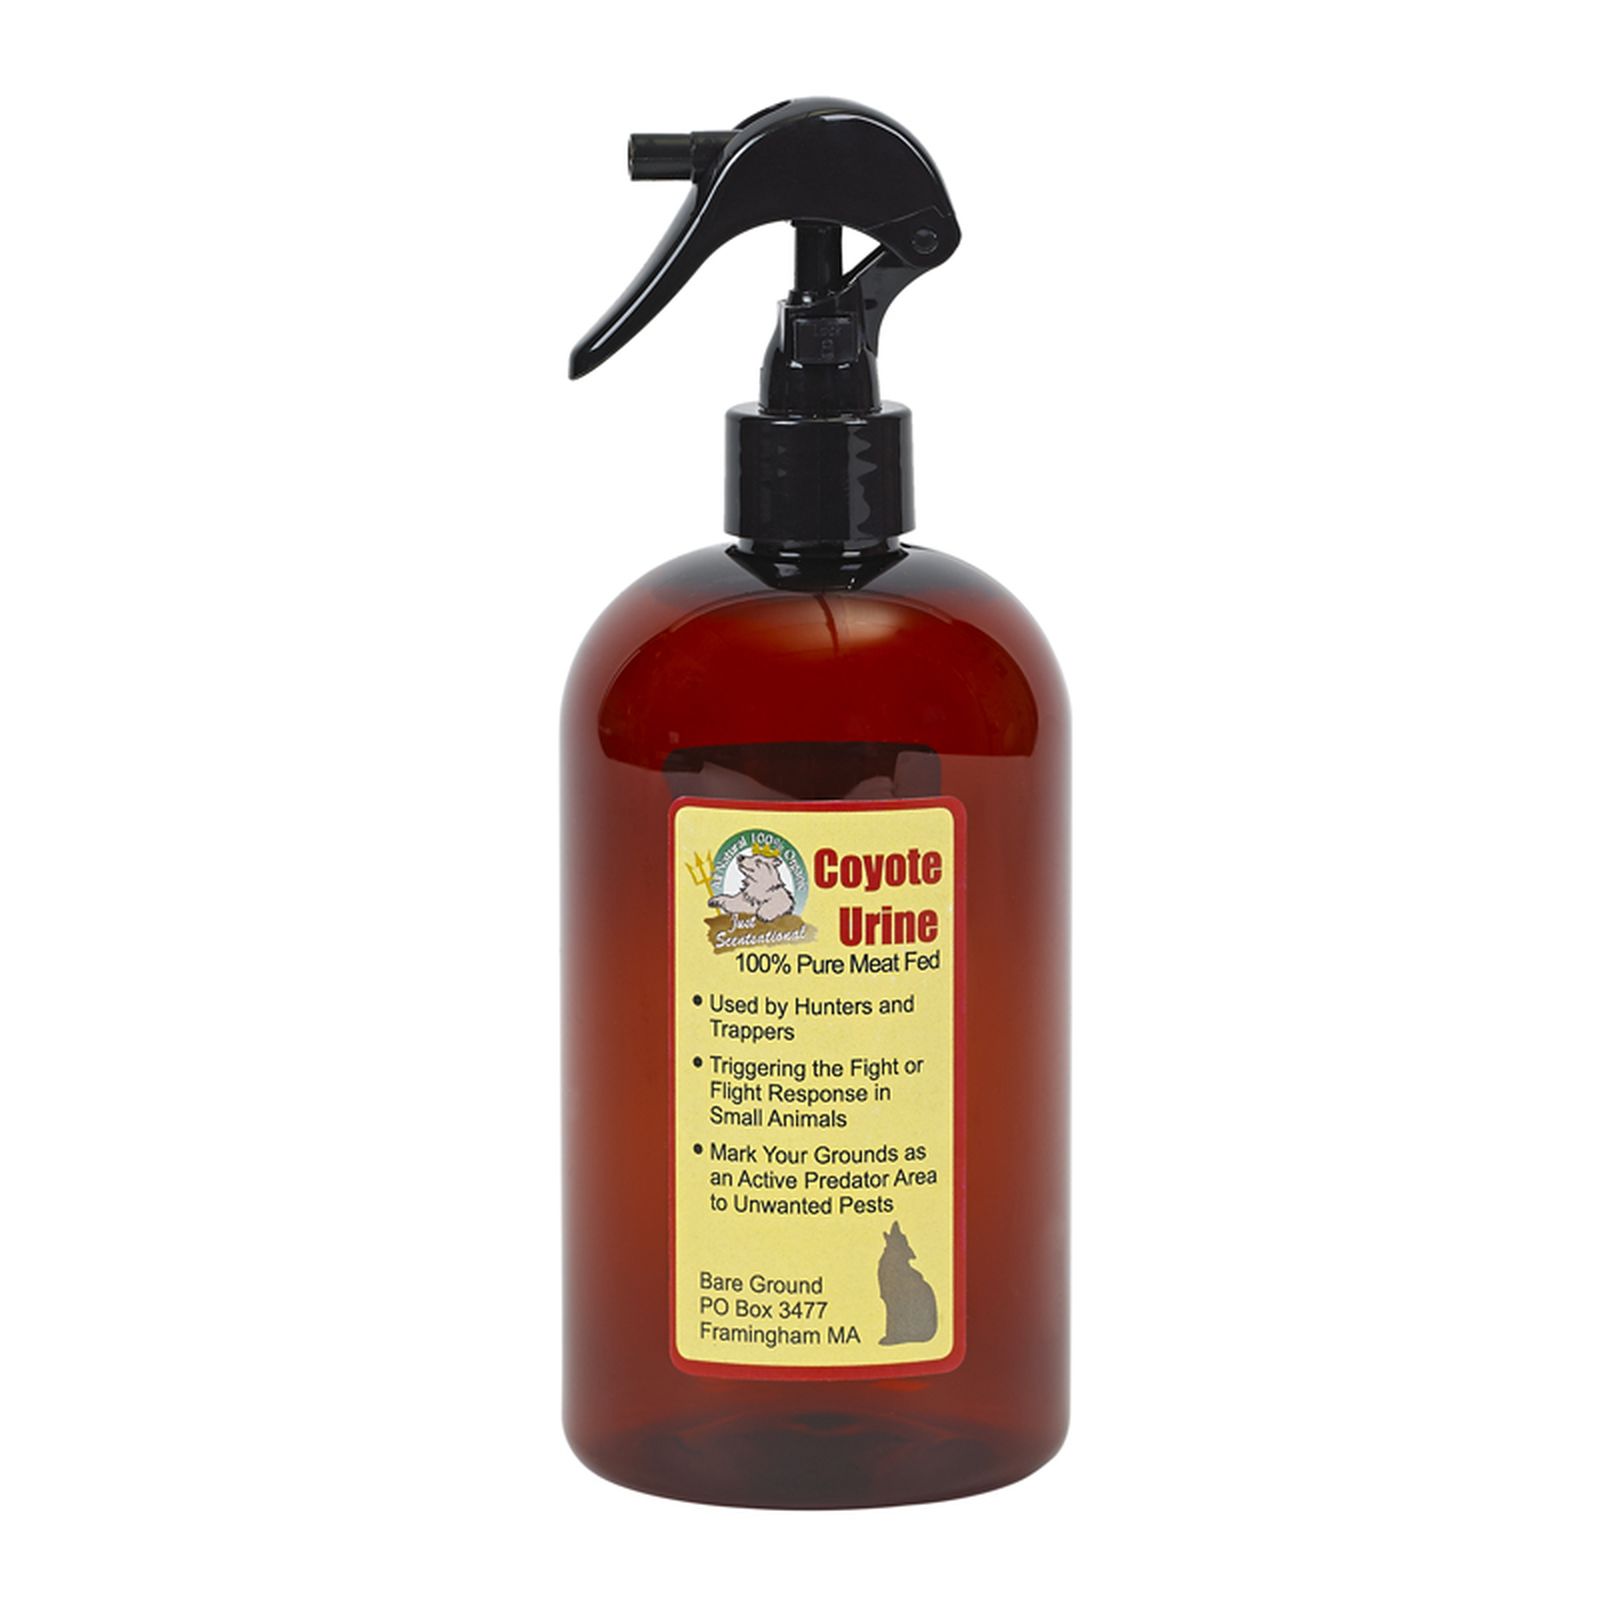 Just Scentsational 16oz Coyote Urine with Sprayer Applicator